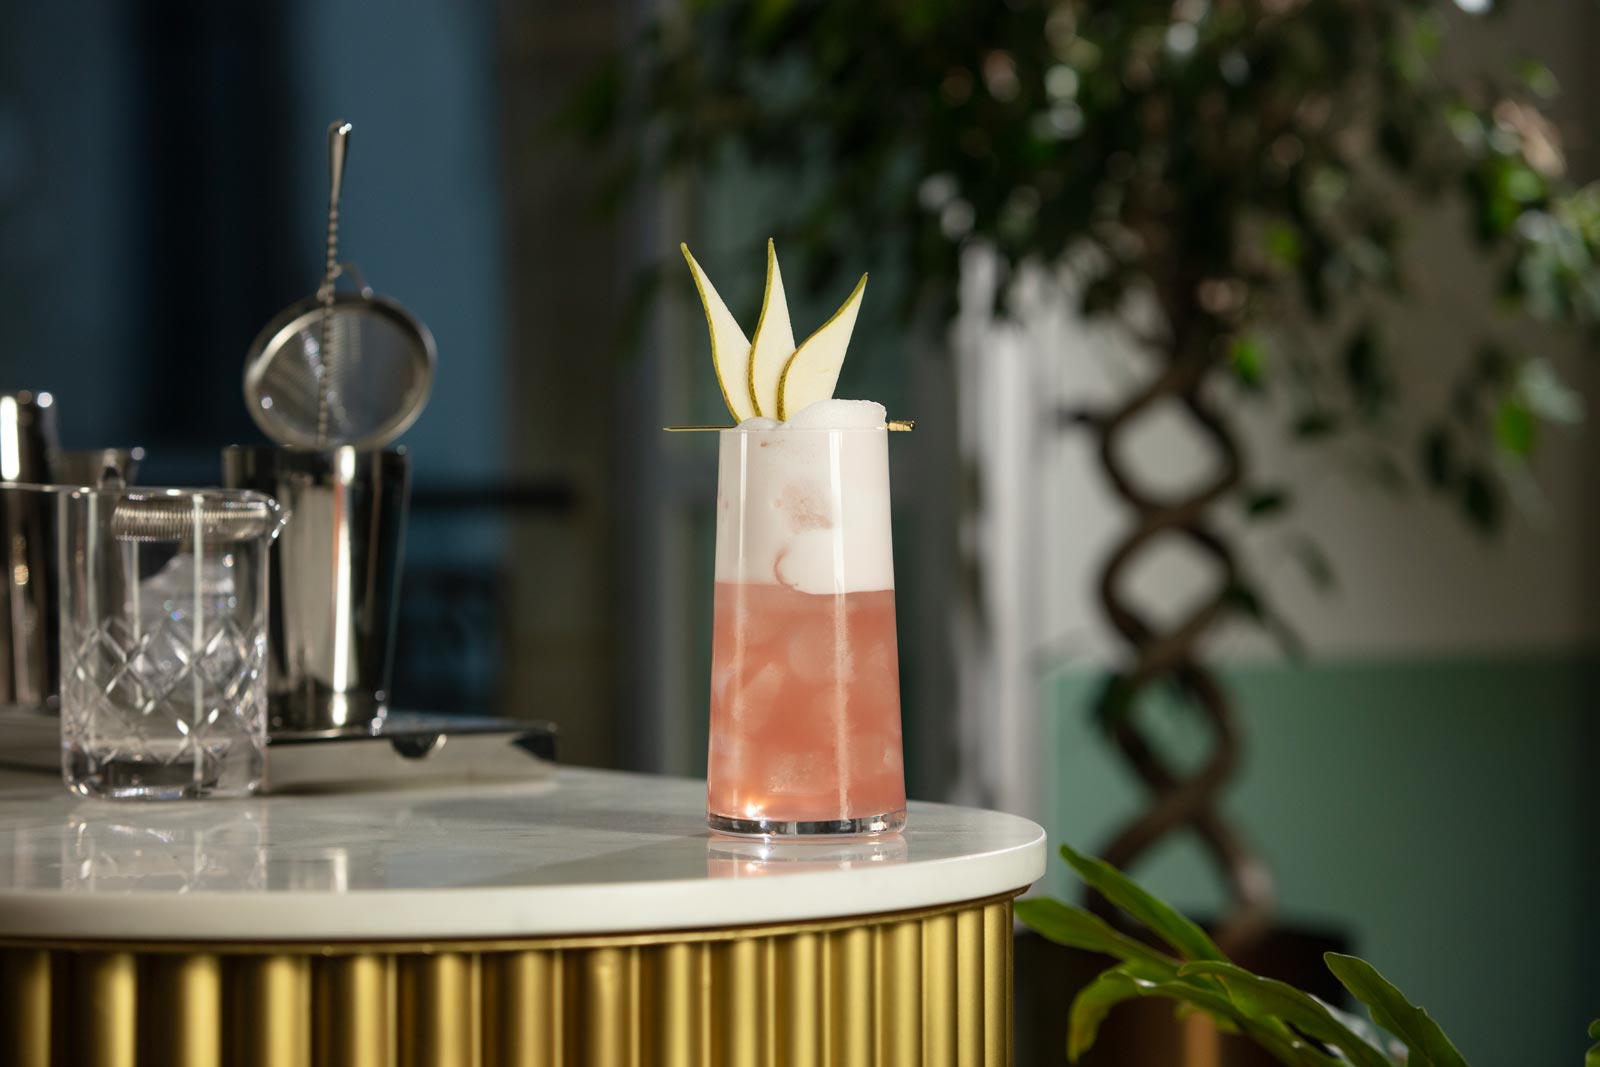 A tall glass is on the edge of a bar. The glass contains a pink drink topped with white foam and a pear fan on a gold pick. Also on the bar we can see various pieces of cocktail making equipment.